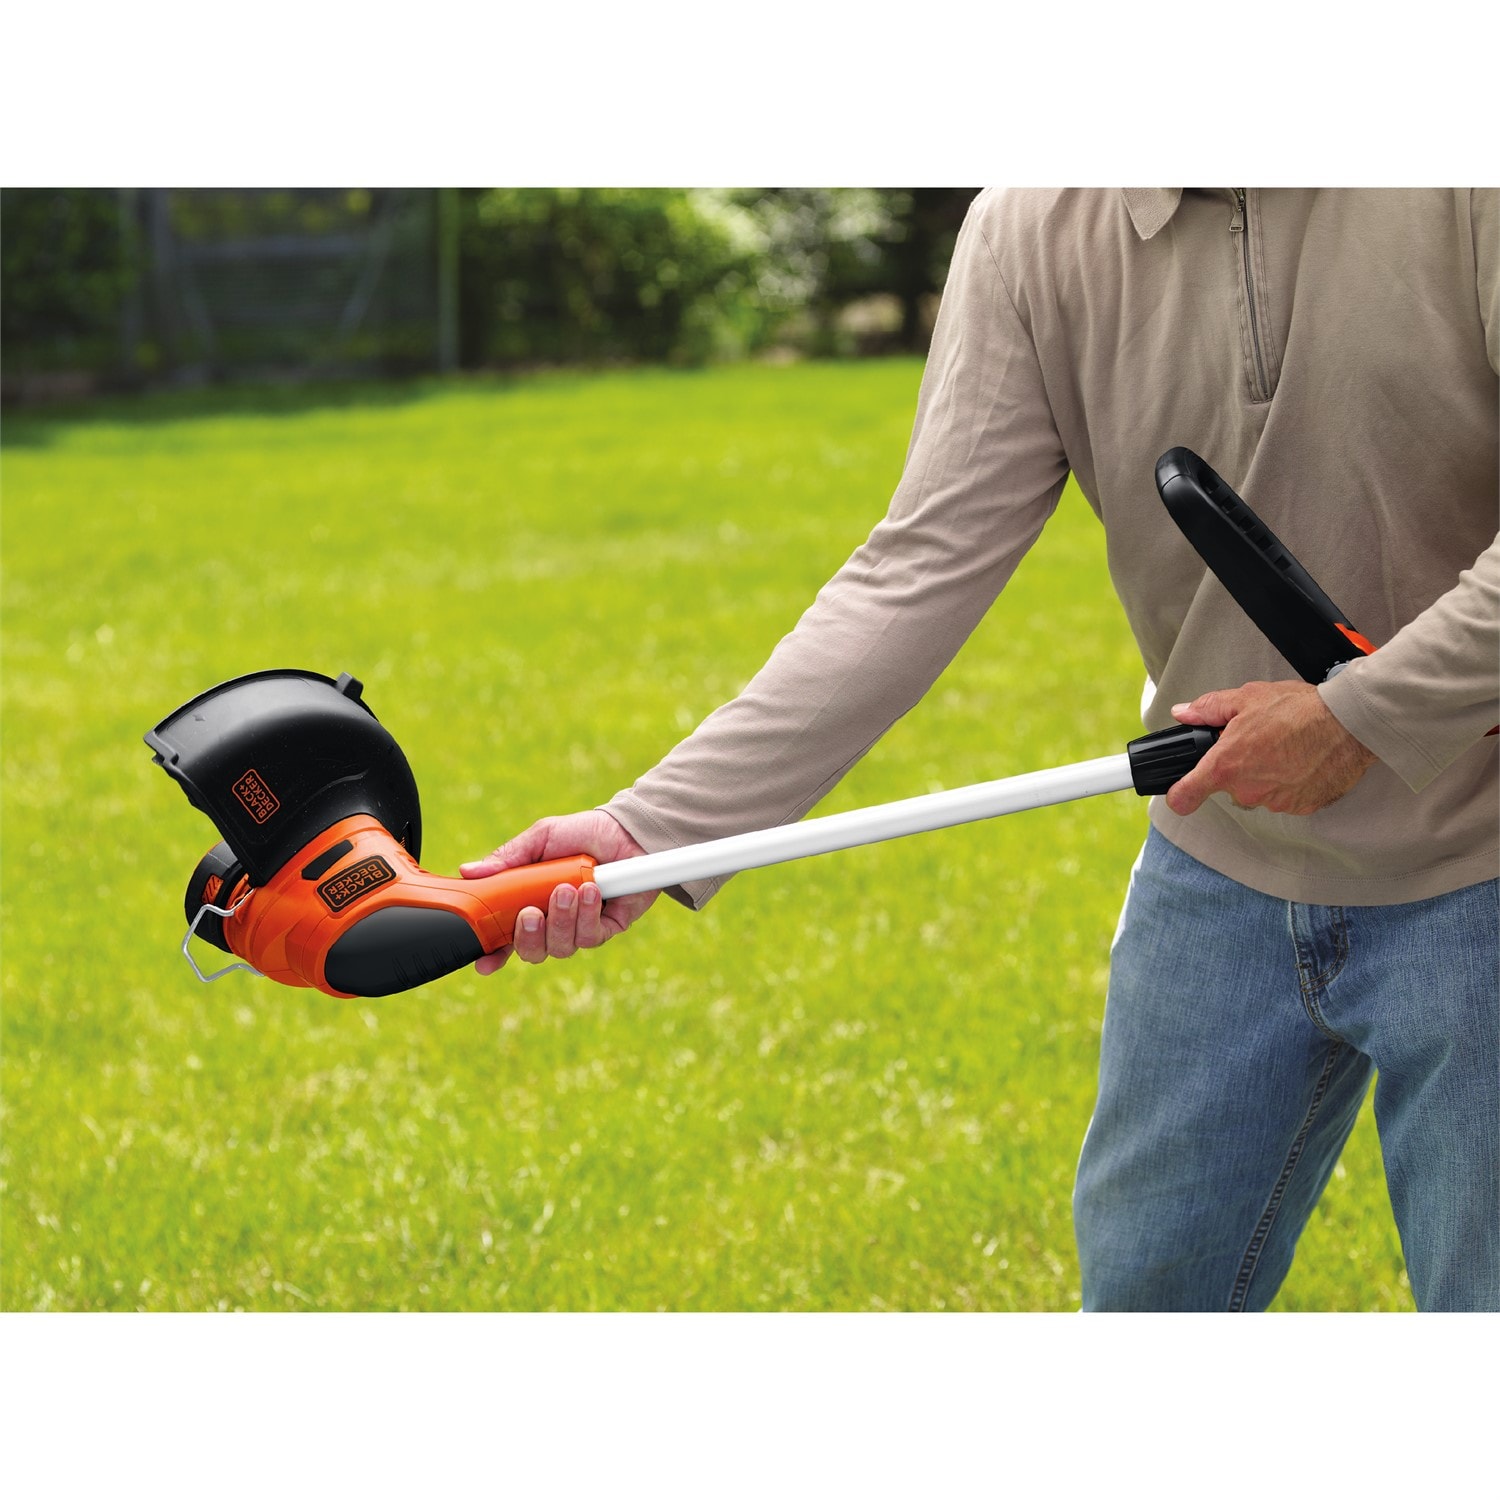 Black and Decker LST420 20V Max Lithium 12” High Performance